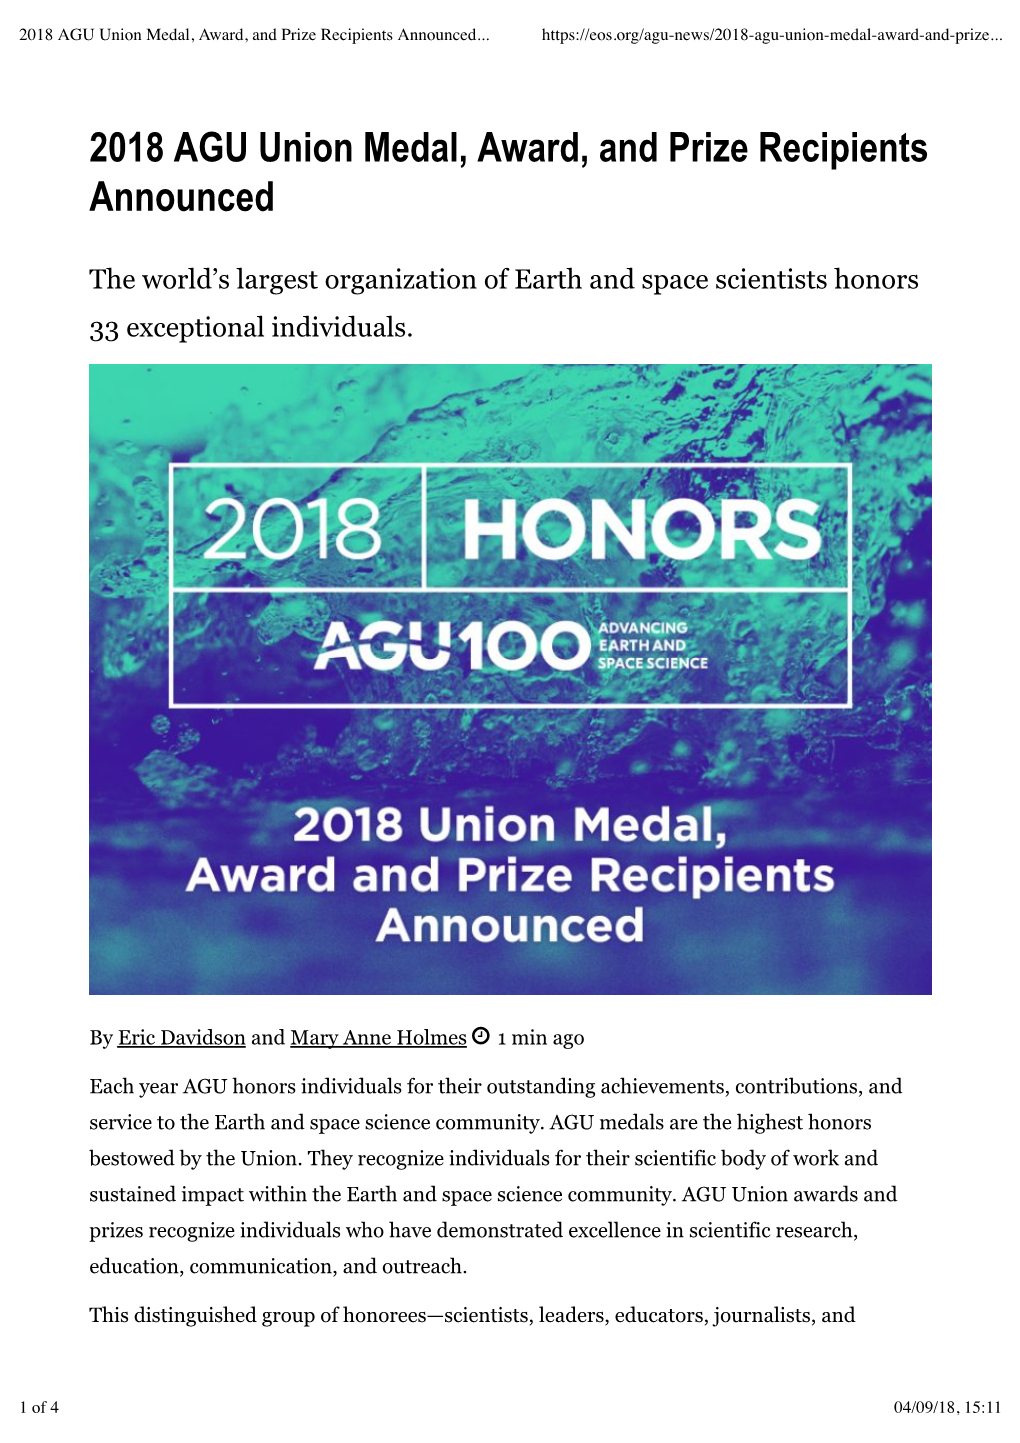 2018 AGU Union Medal, Award, and Prize Recipients Announced